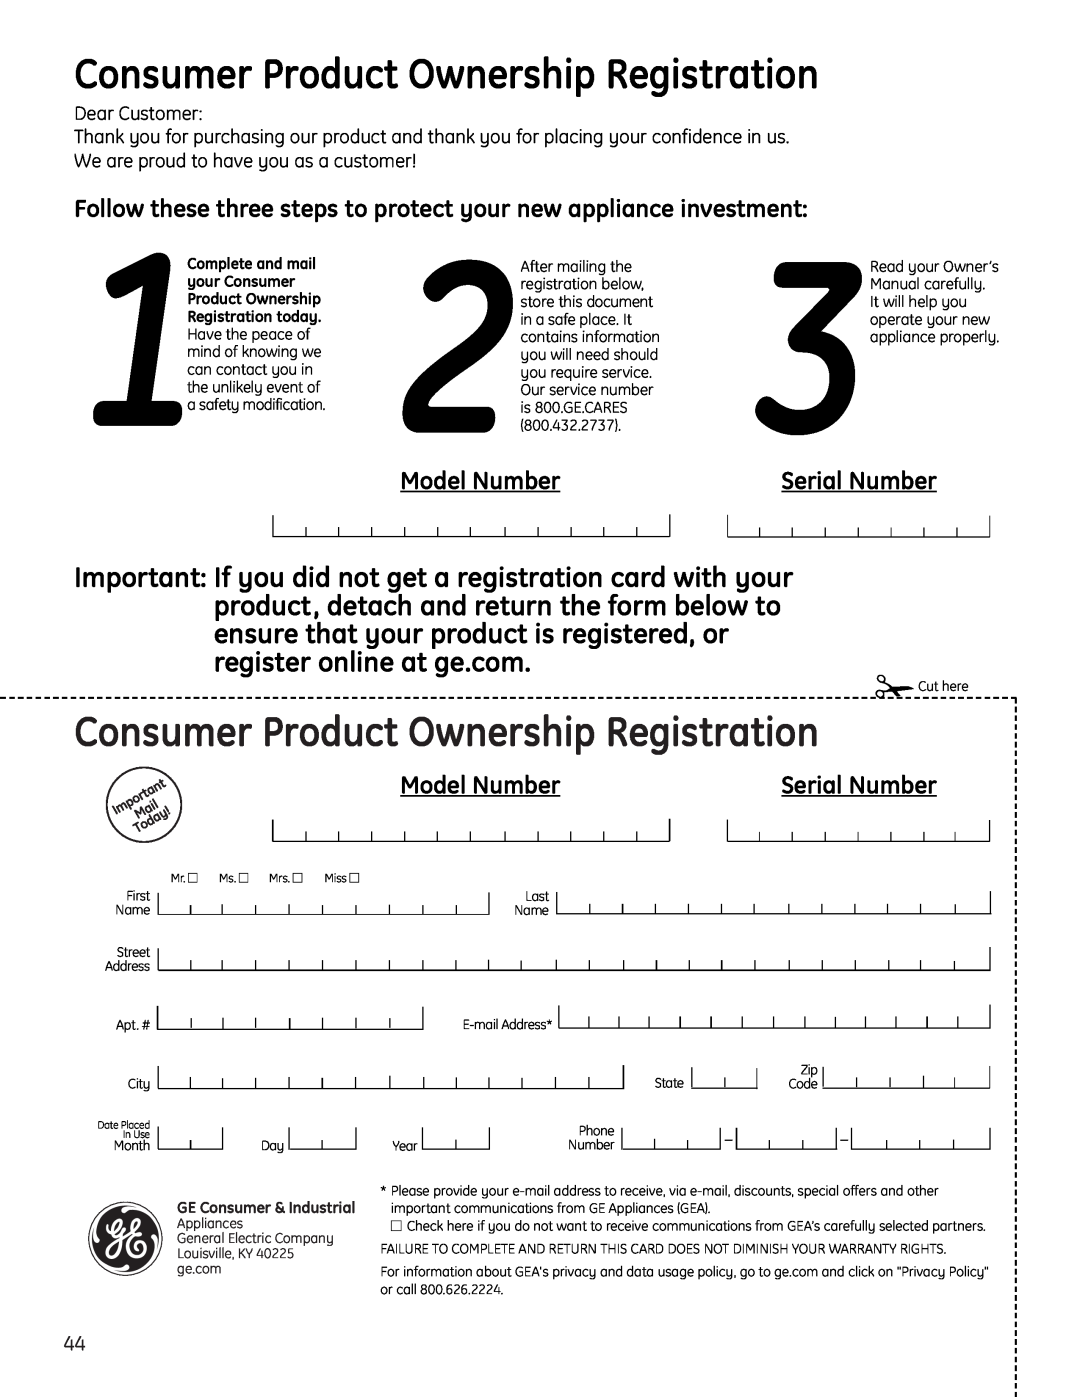 GE 23, 25, 26 Follow these three steps to protect your new appliance investment, Model Number, Serial Number 